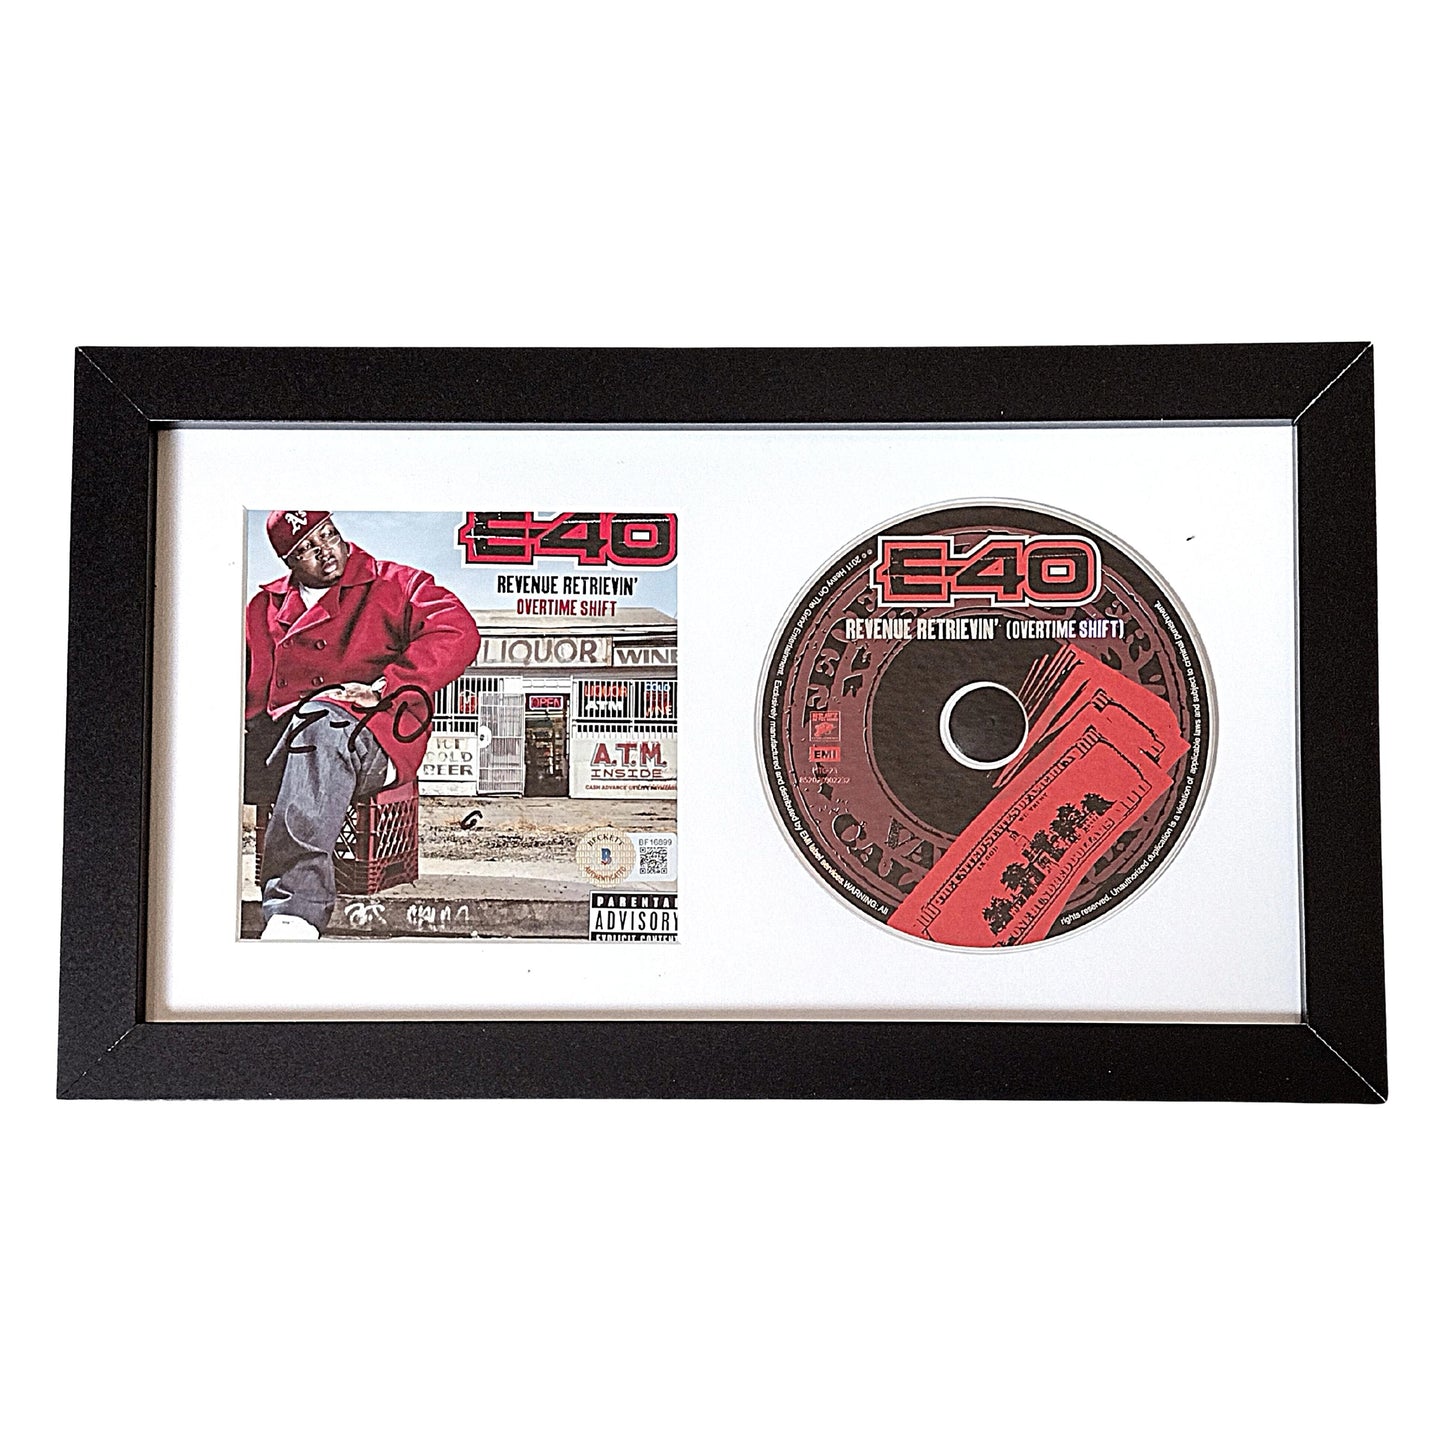 Music- Autographed- E-40 Signed Revenue Retrievin' Overtime Shift CD Cover Framed and Matted Display Beckett Certified Authentic 101